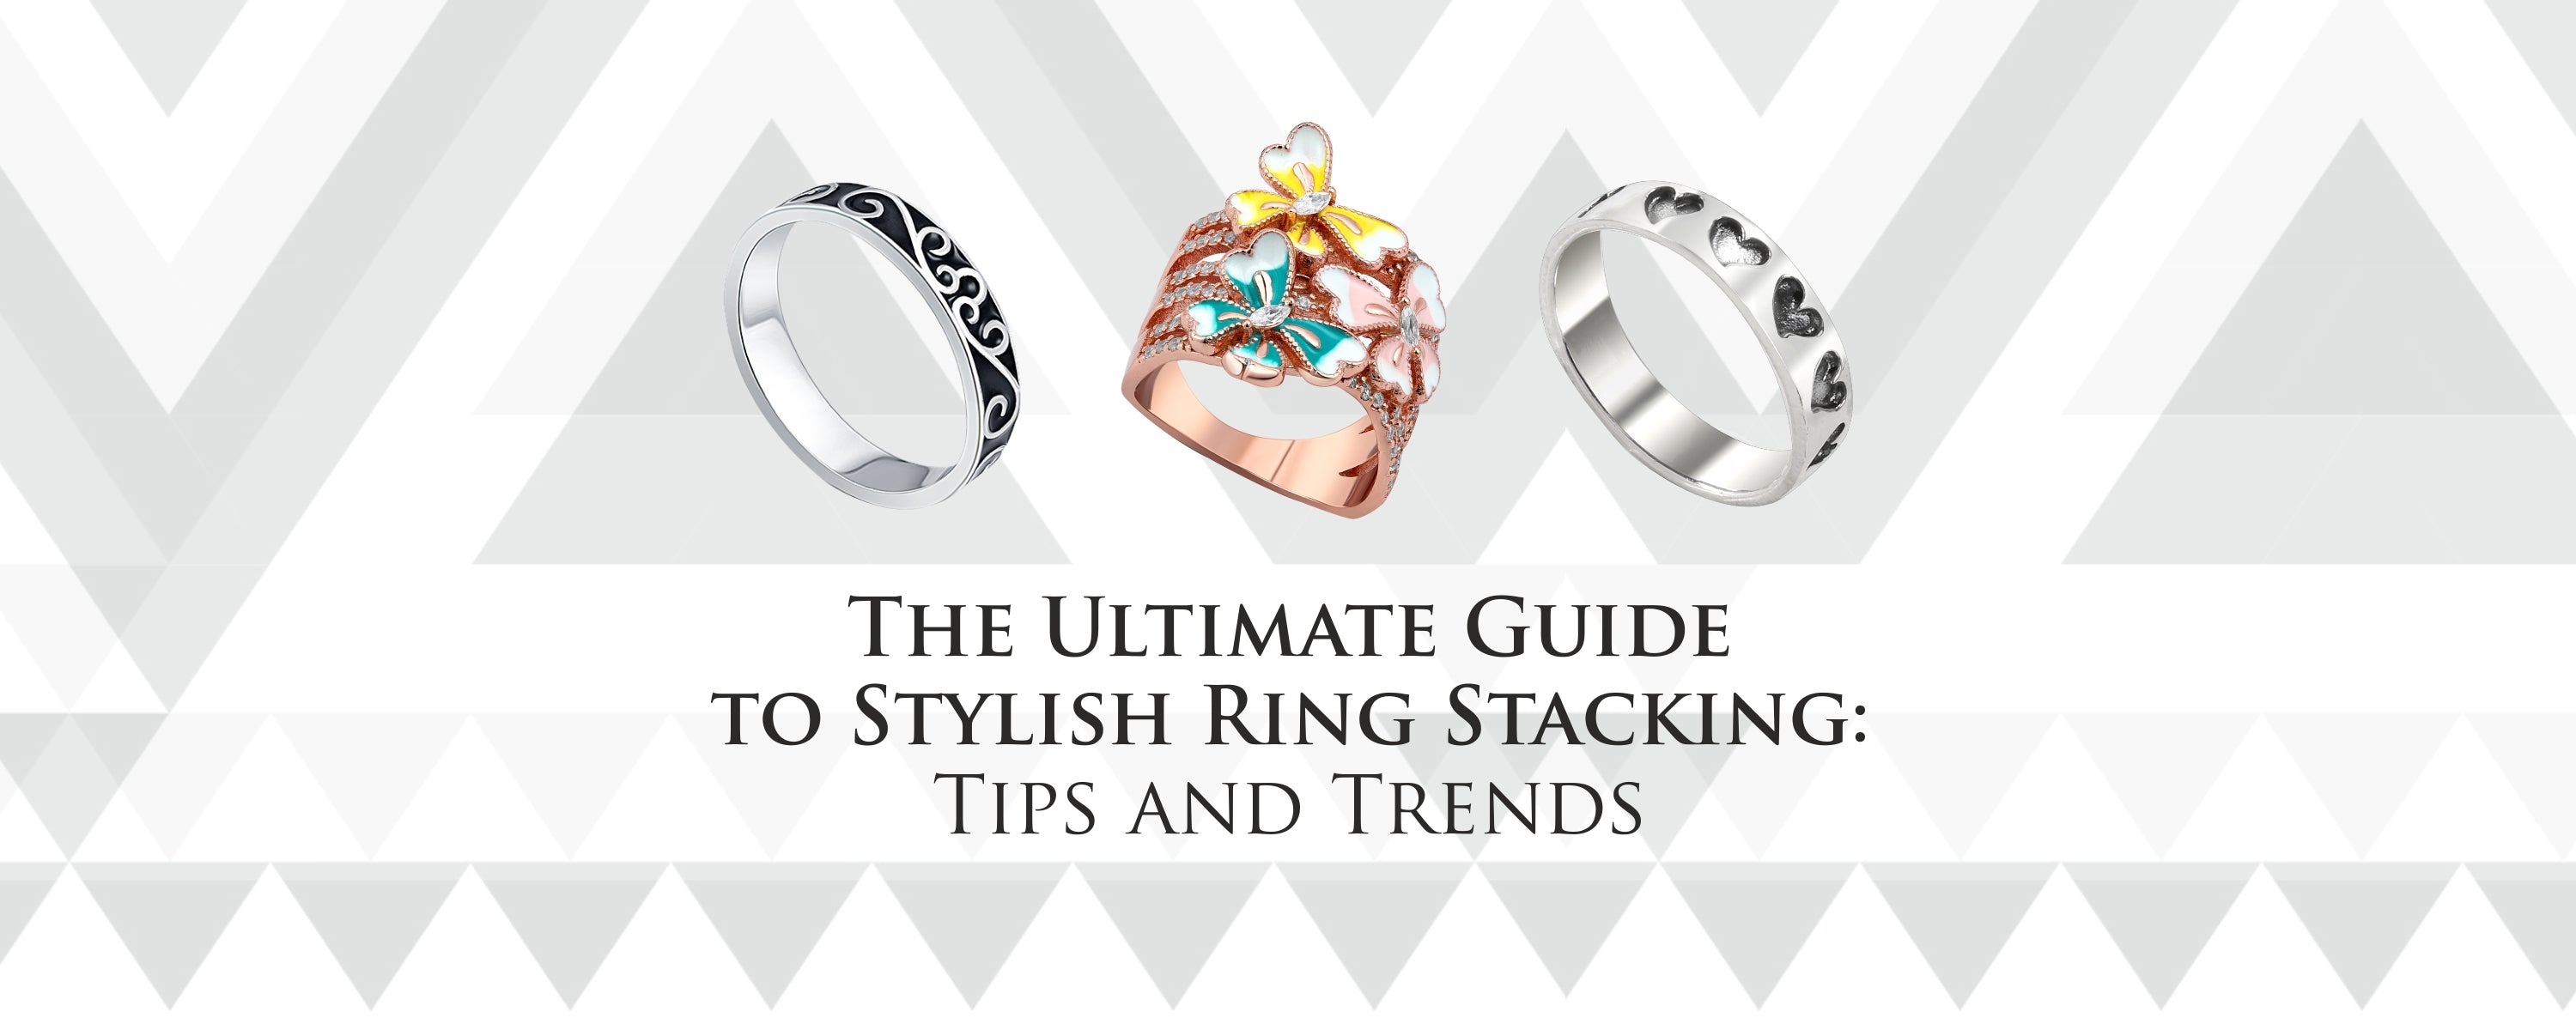 The Ultimate Guide to Stylish Ring Stacking: Tips and Trends